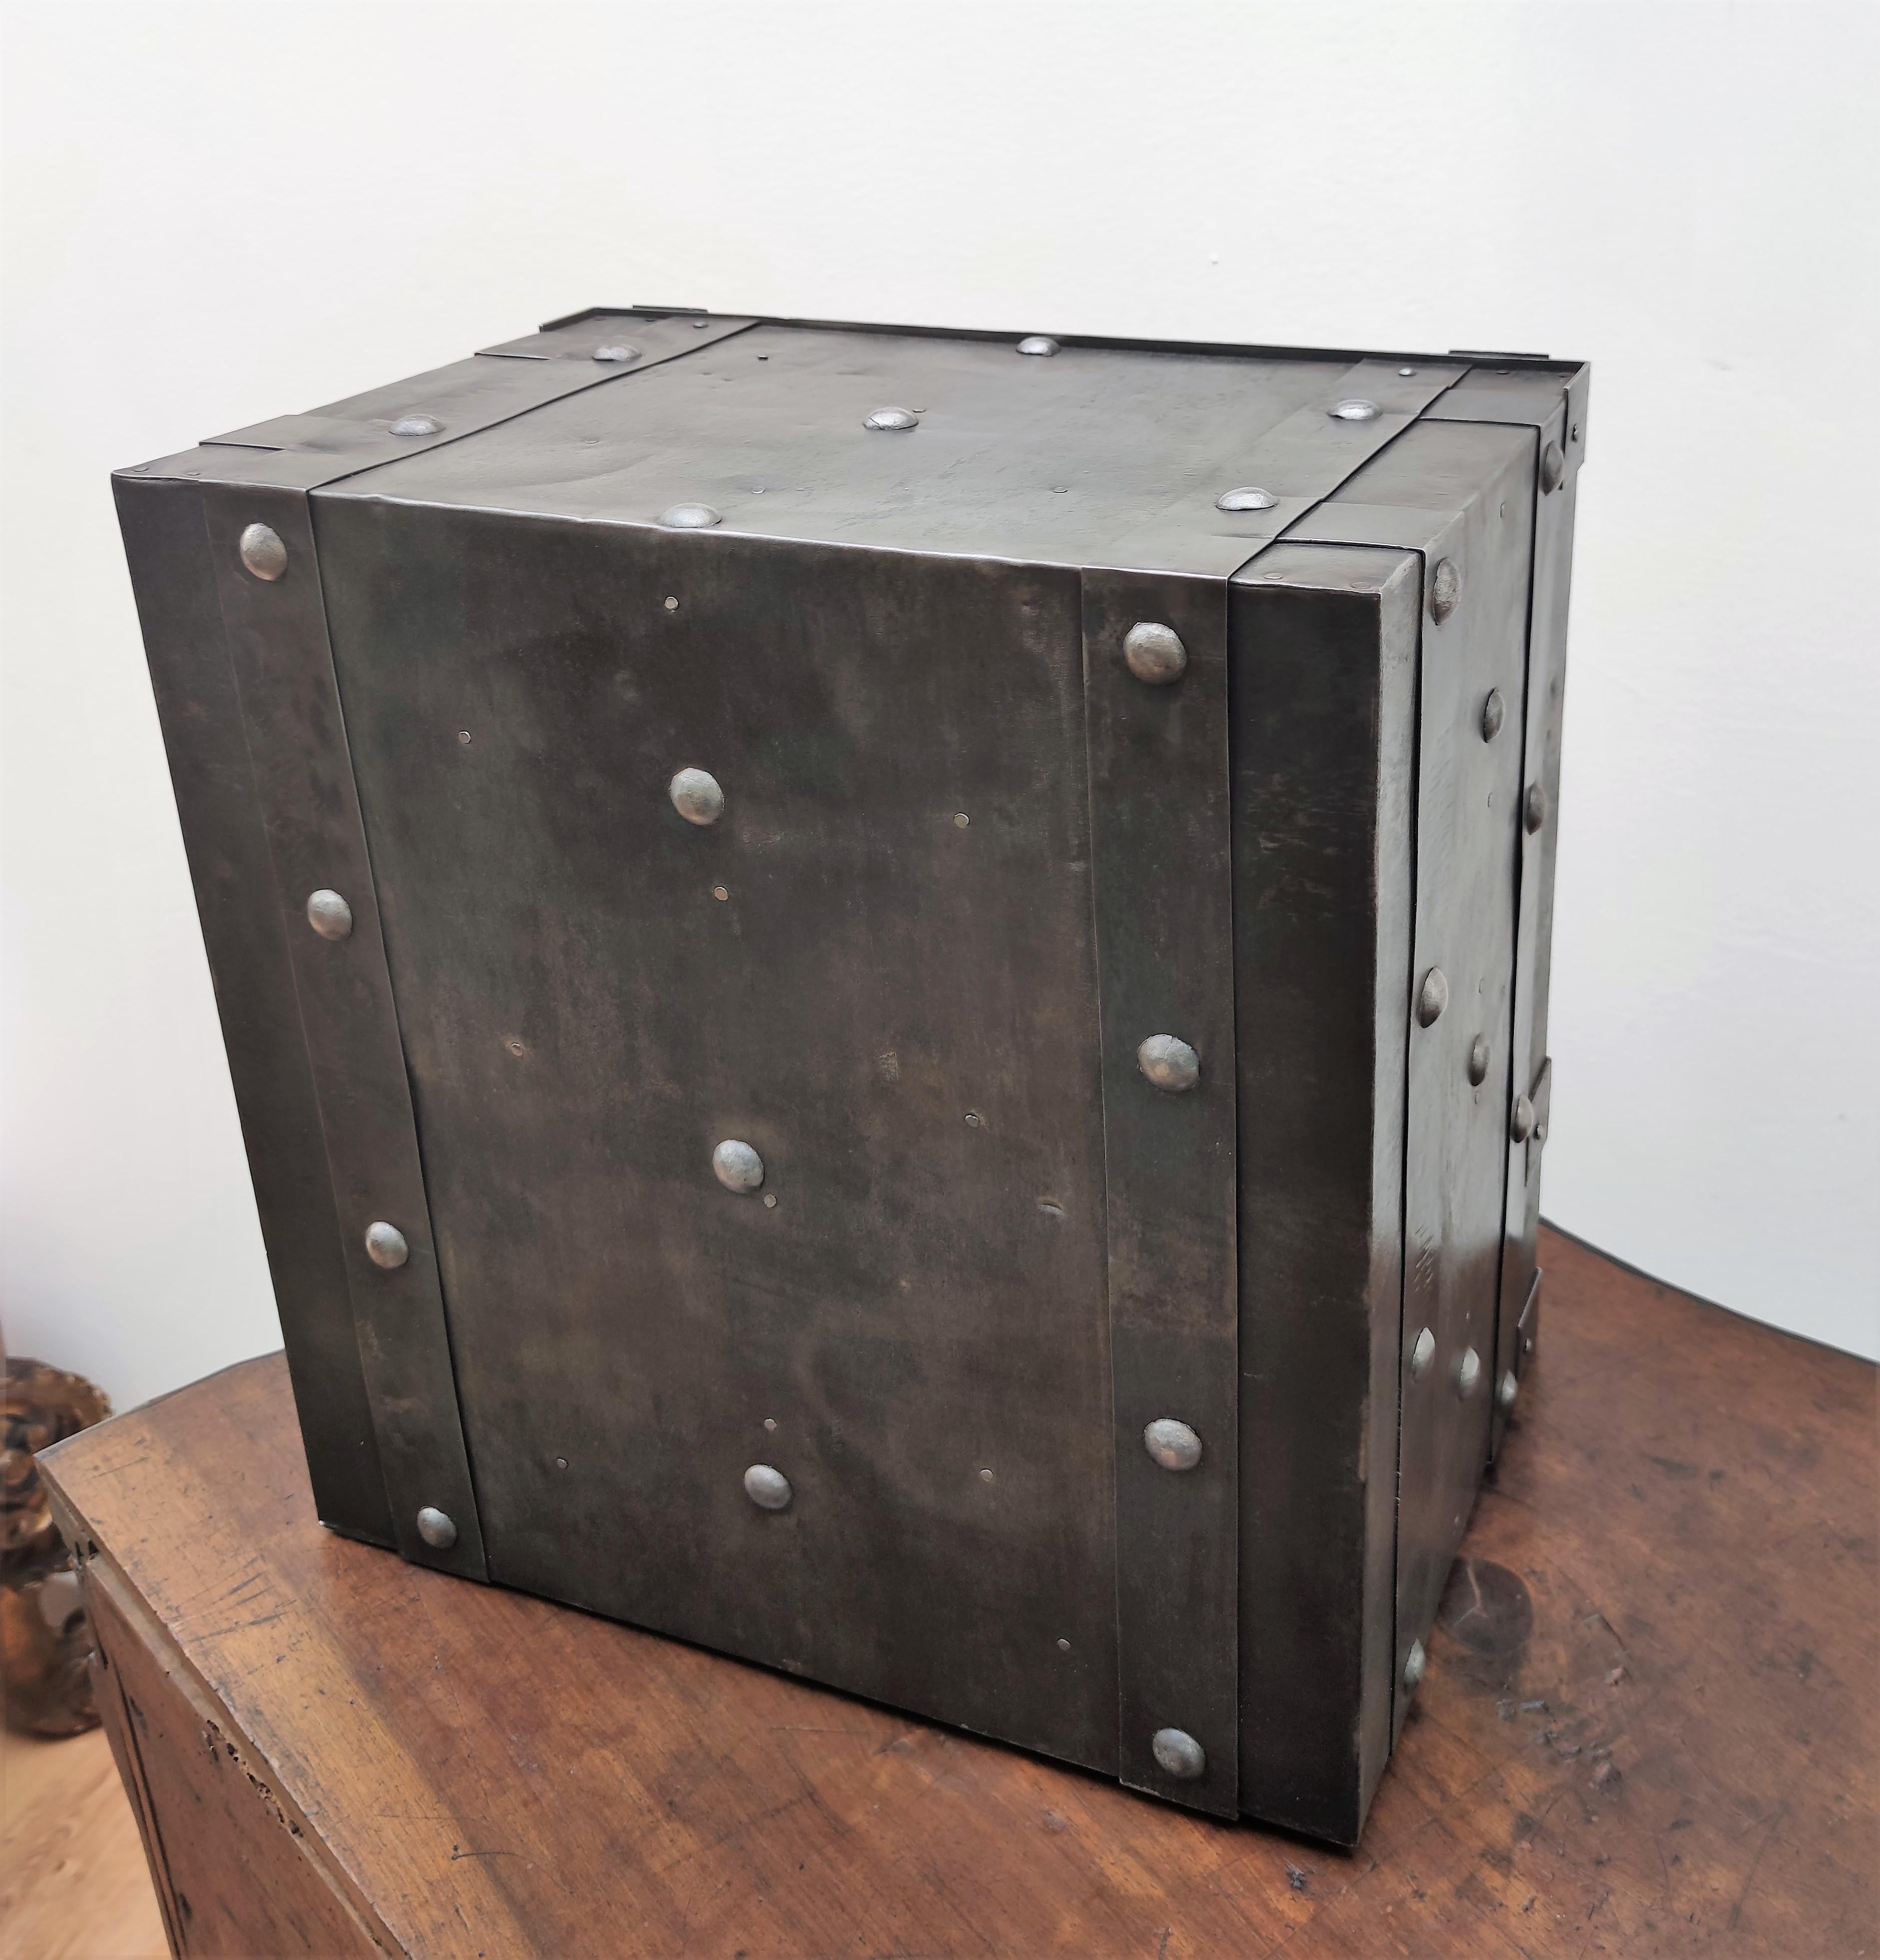 1820 Antique Italian Wrought Iron Studded Antique Safe Strongbox Dry Bar Cabinet 2